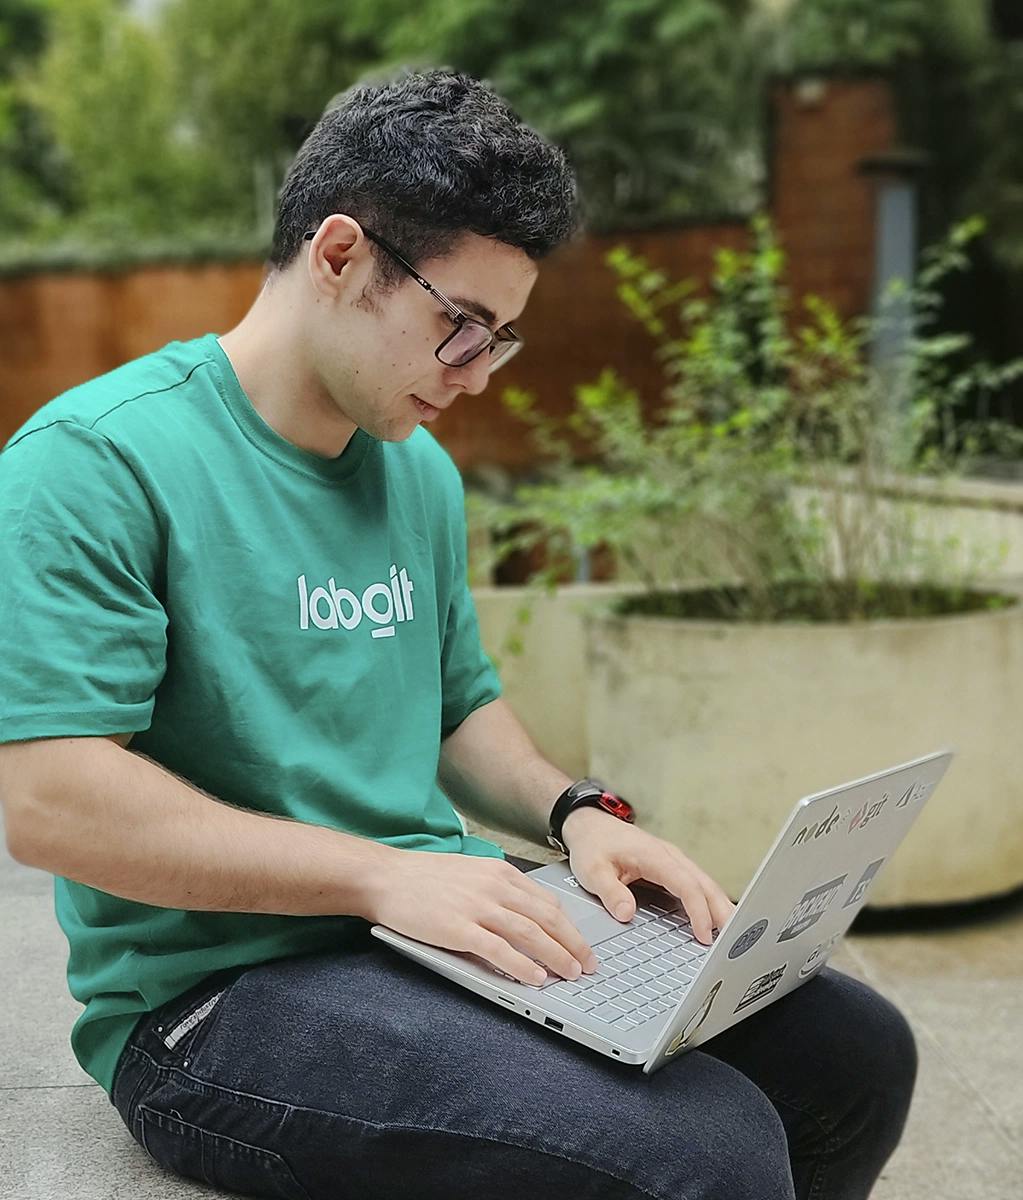 Luis Eduardo, backend engineer at Laborit, working on the outside of our glass house.